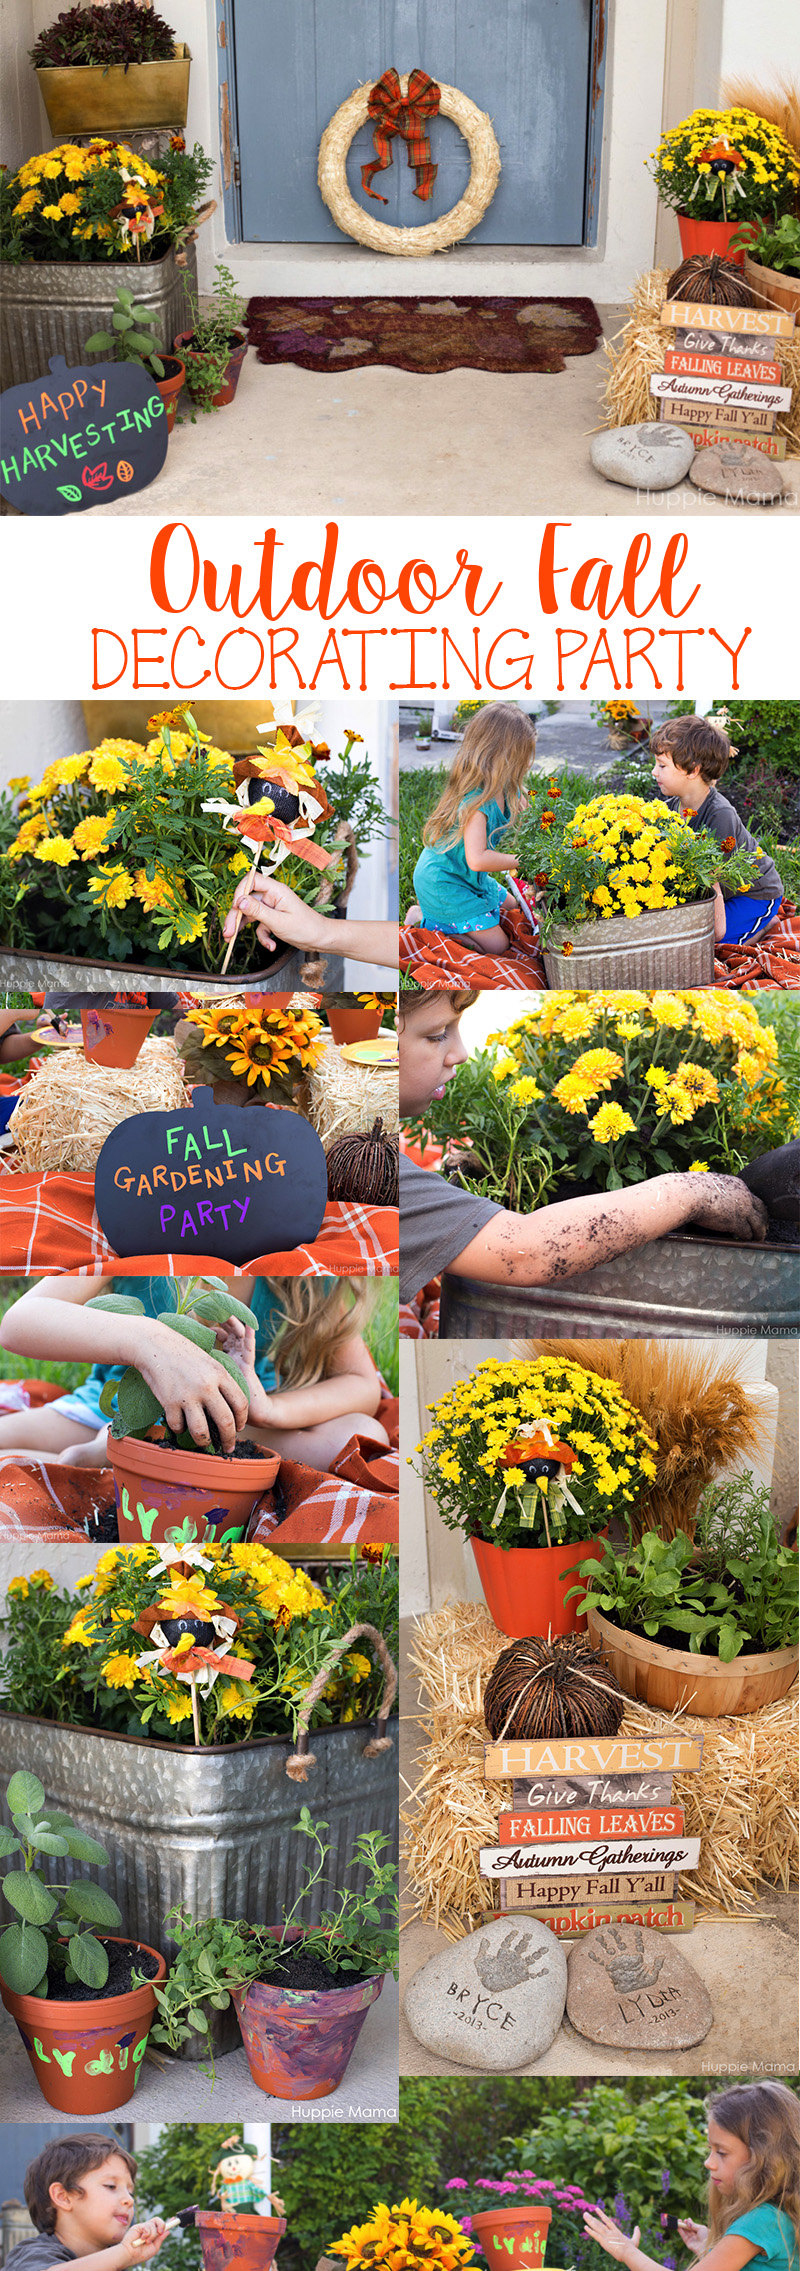 Outdoor Fall Decorating Party ideas